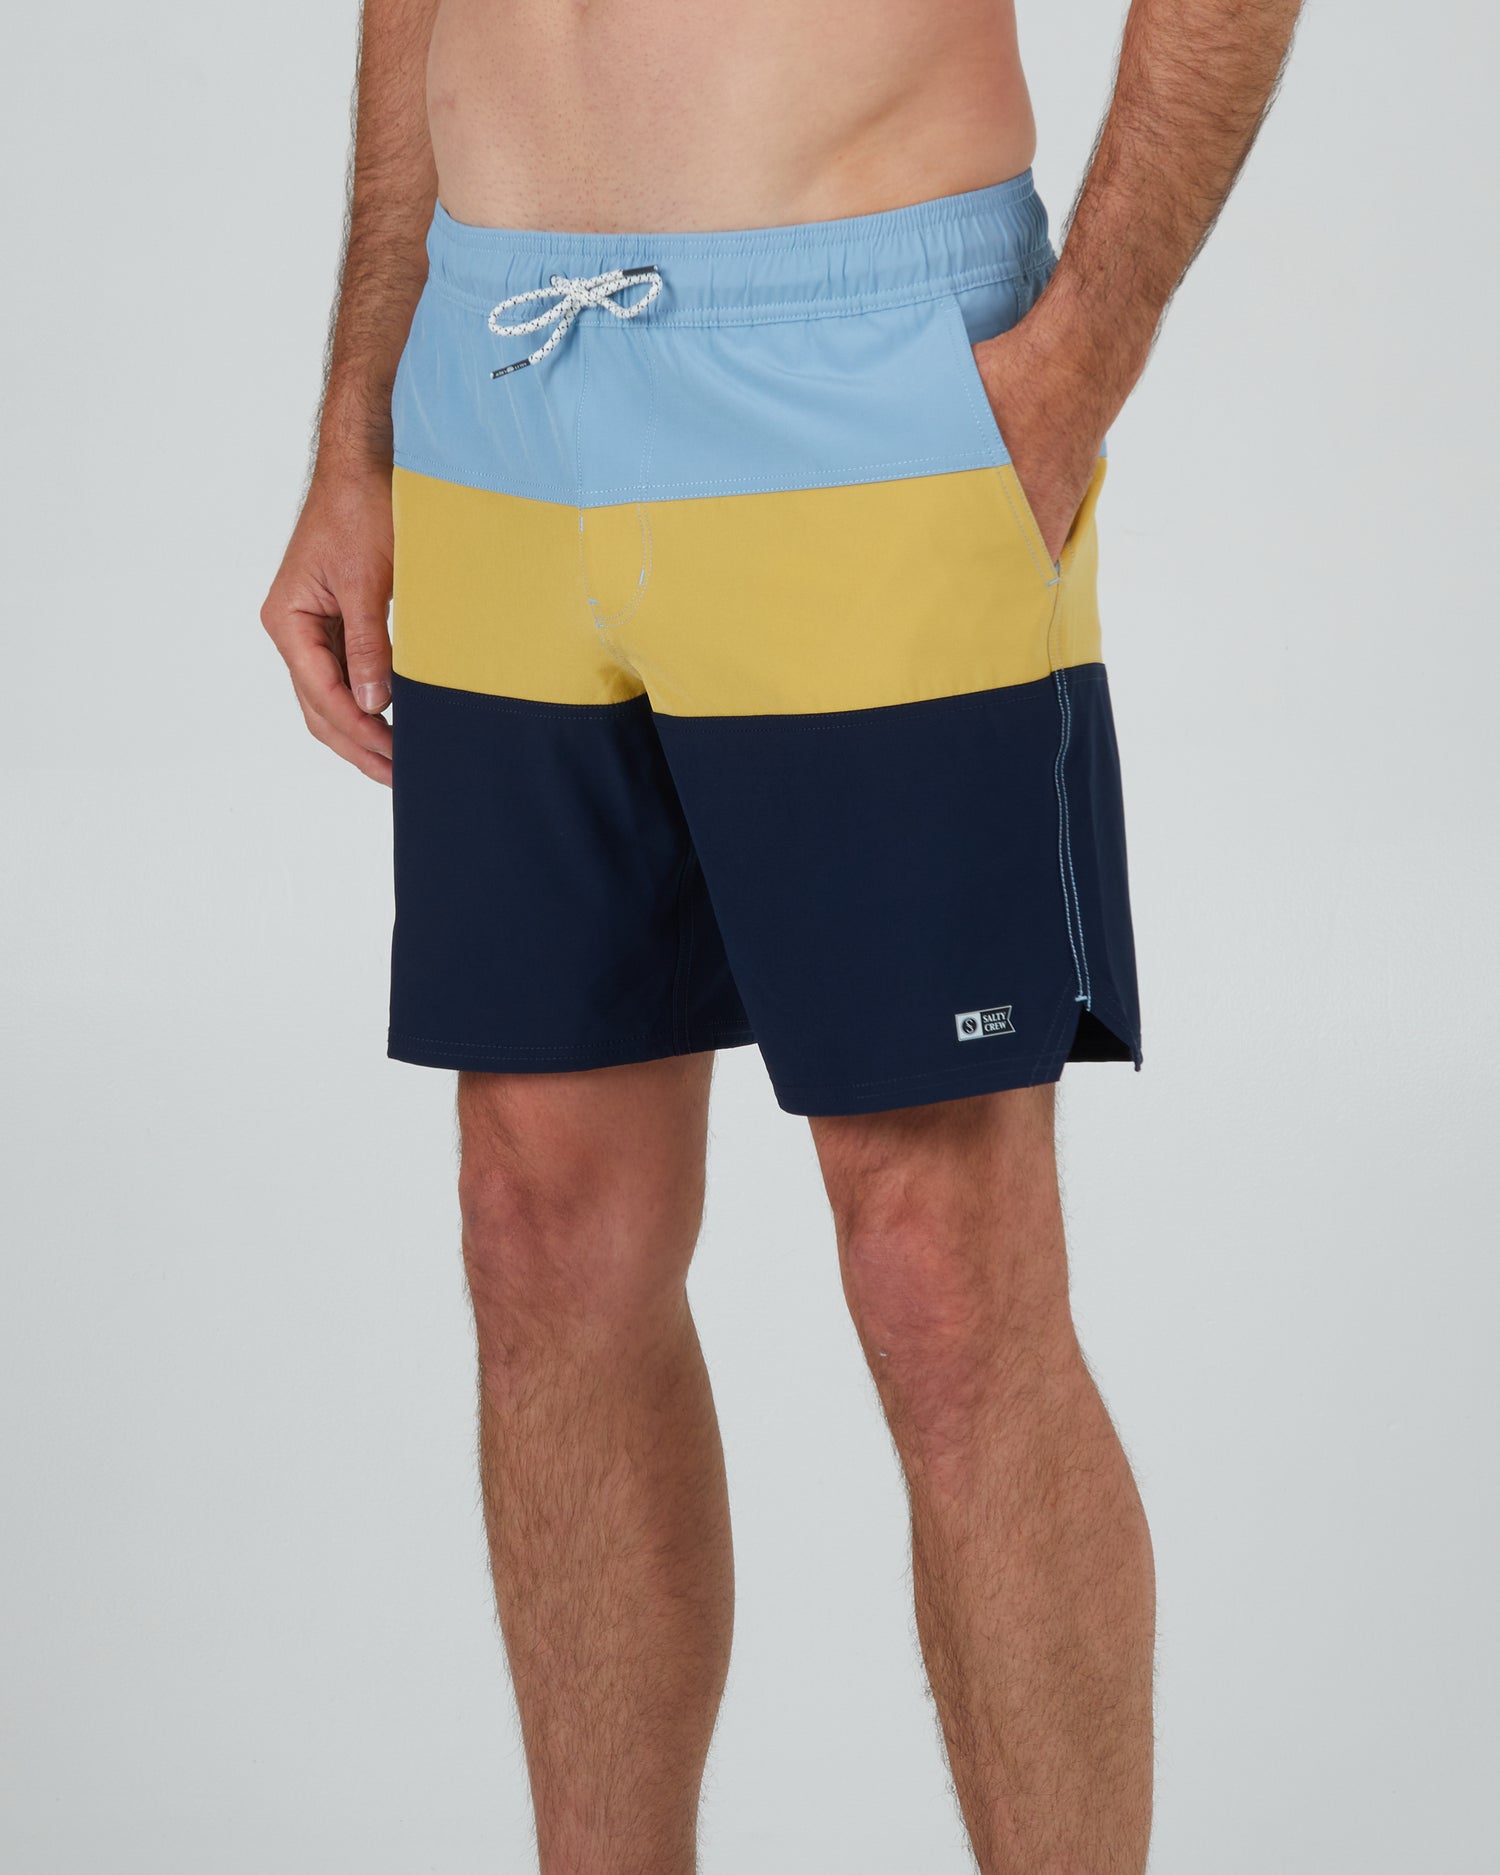 front angled view of Beacons 2 Seaweed Elastic Boardshort